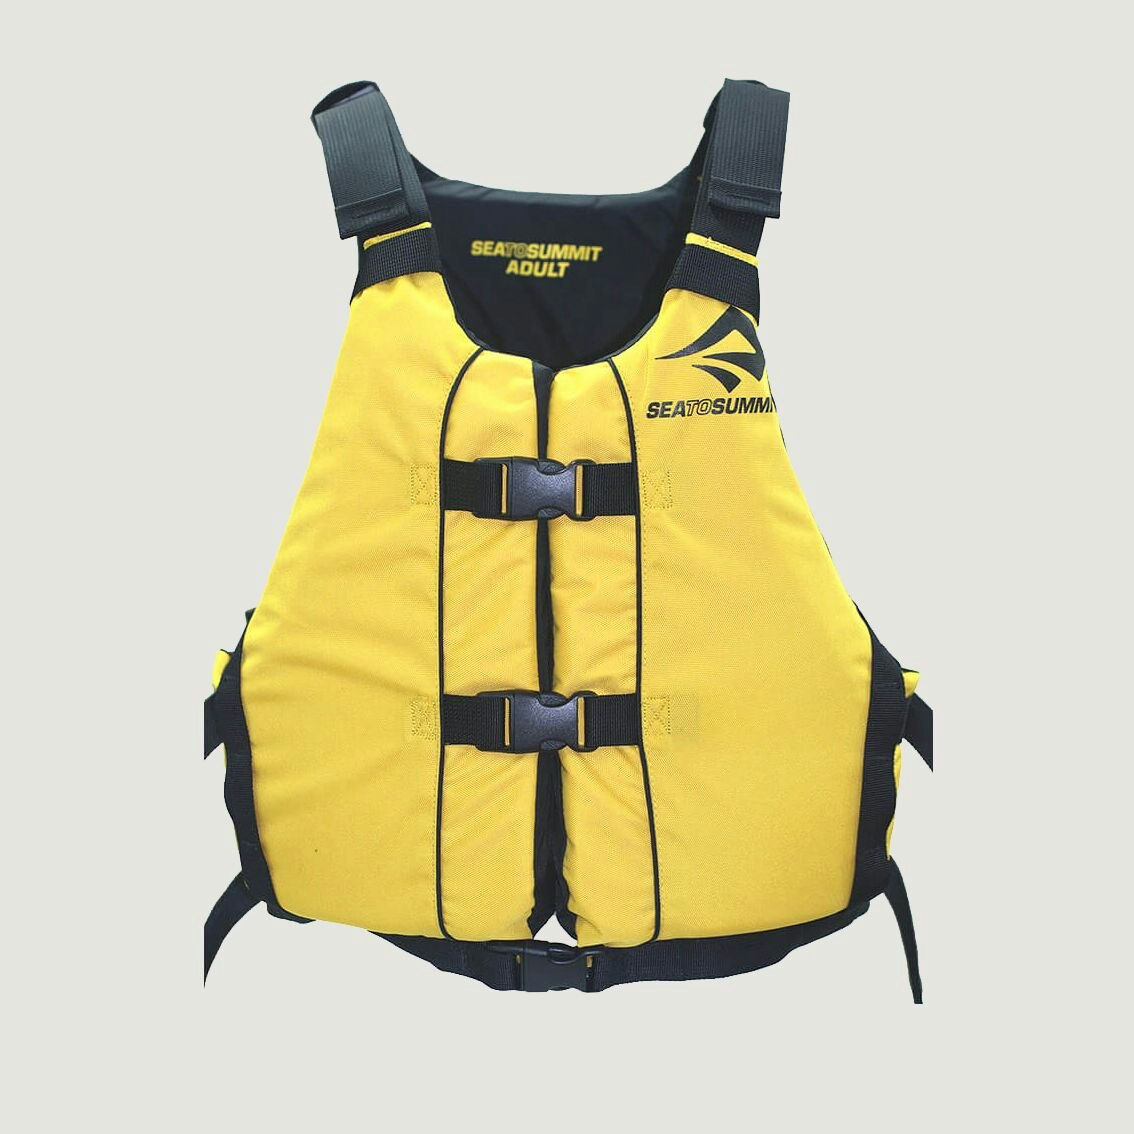 Sea to Summit Commercial Multifit PFD